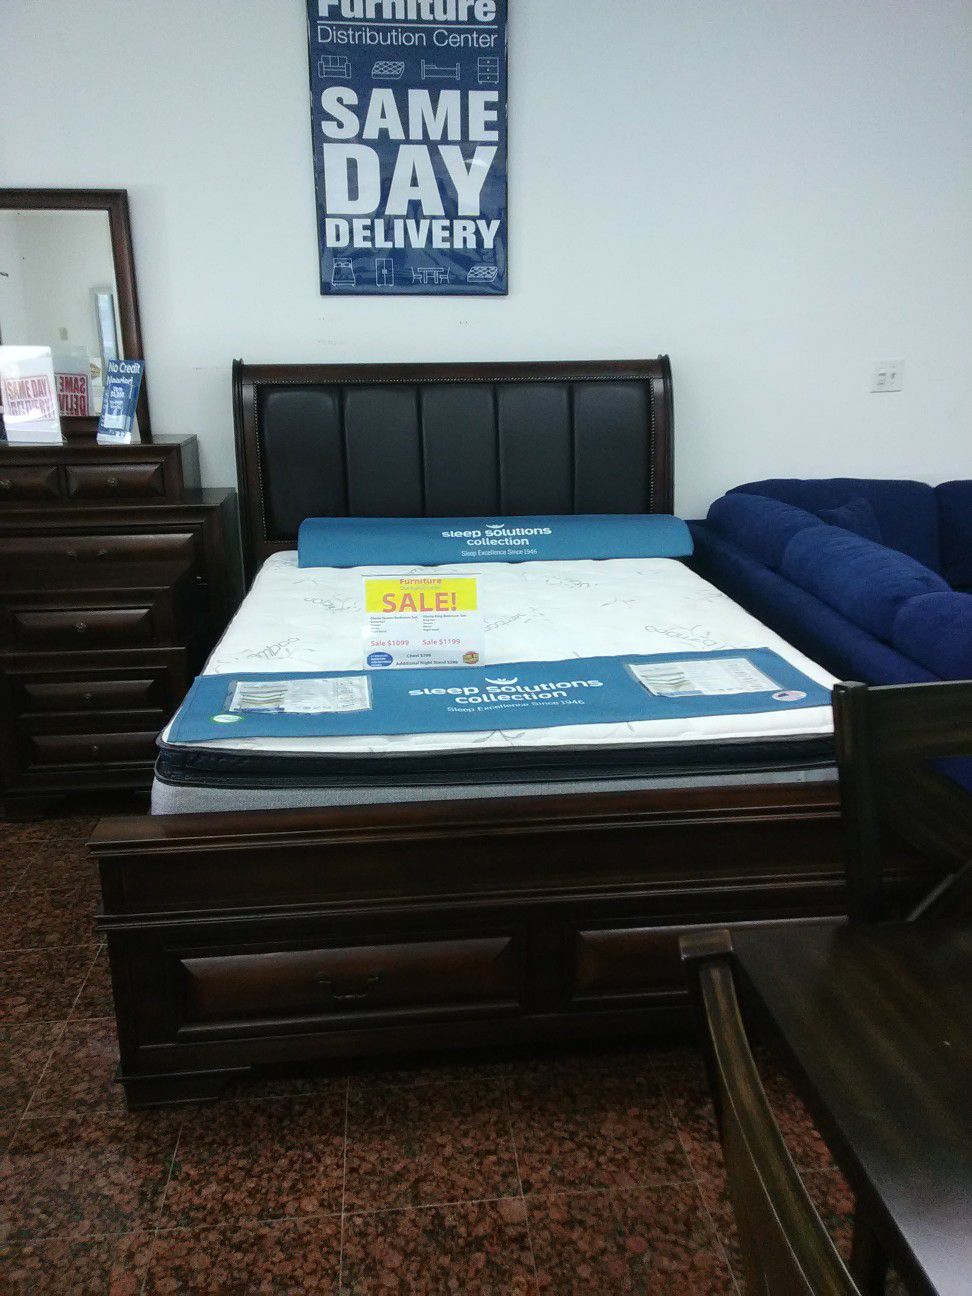 GLORIA QUEEN BED,DRESSER,MIRROR,1 NIGHTSTAND,ADD THE CHEST FOR $299,KING SIZE 1,199,SAME DAY DELIVERY,NO CREDIT CHECK.